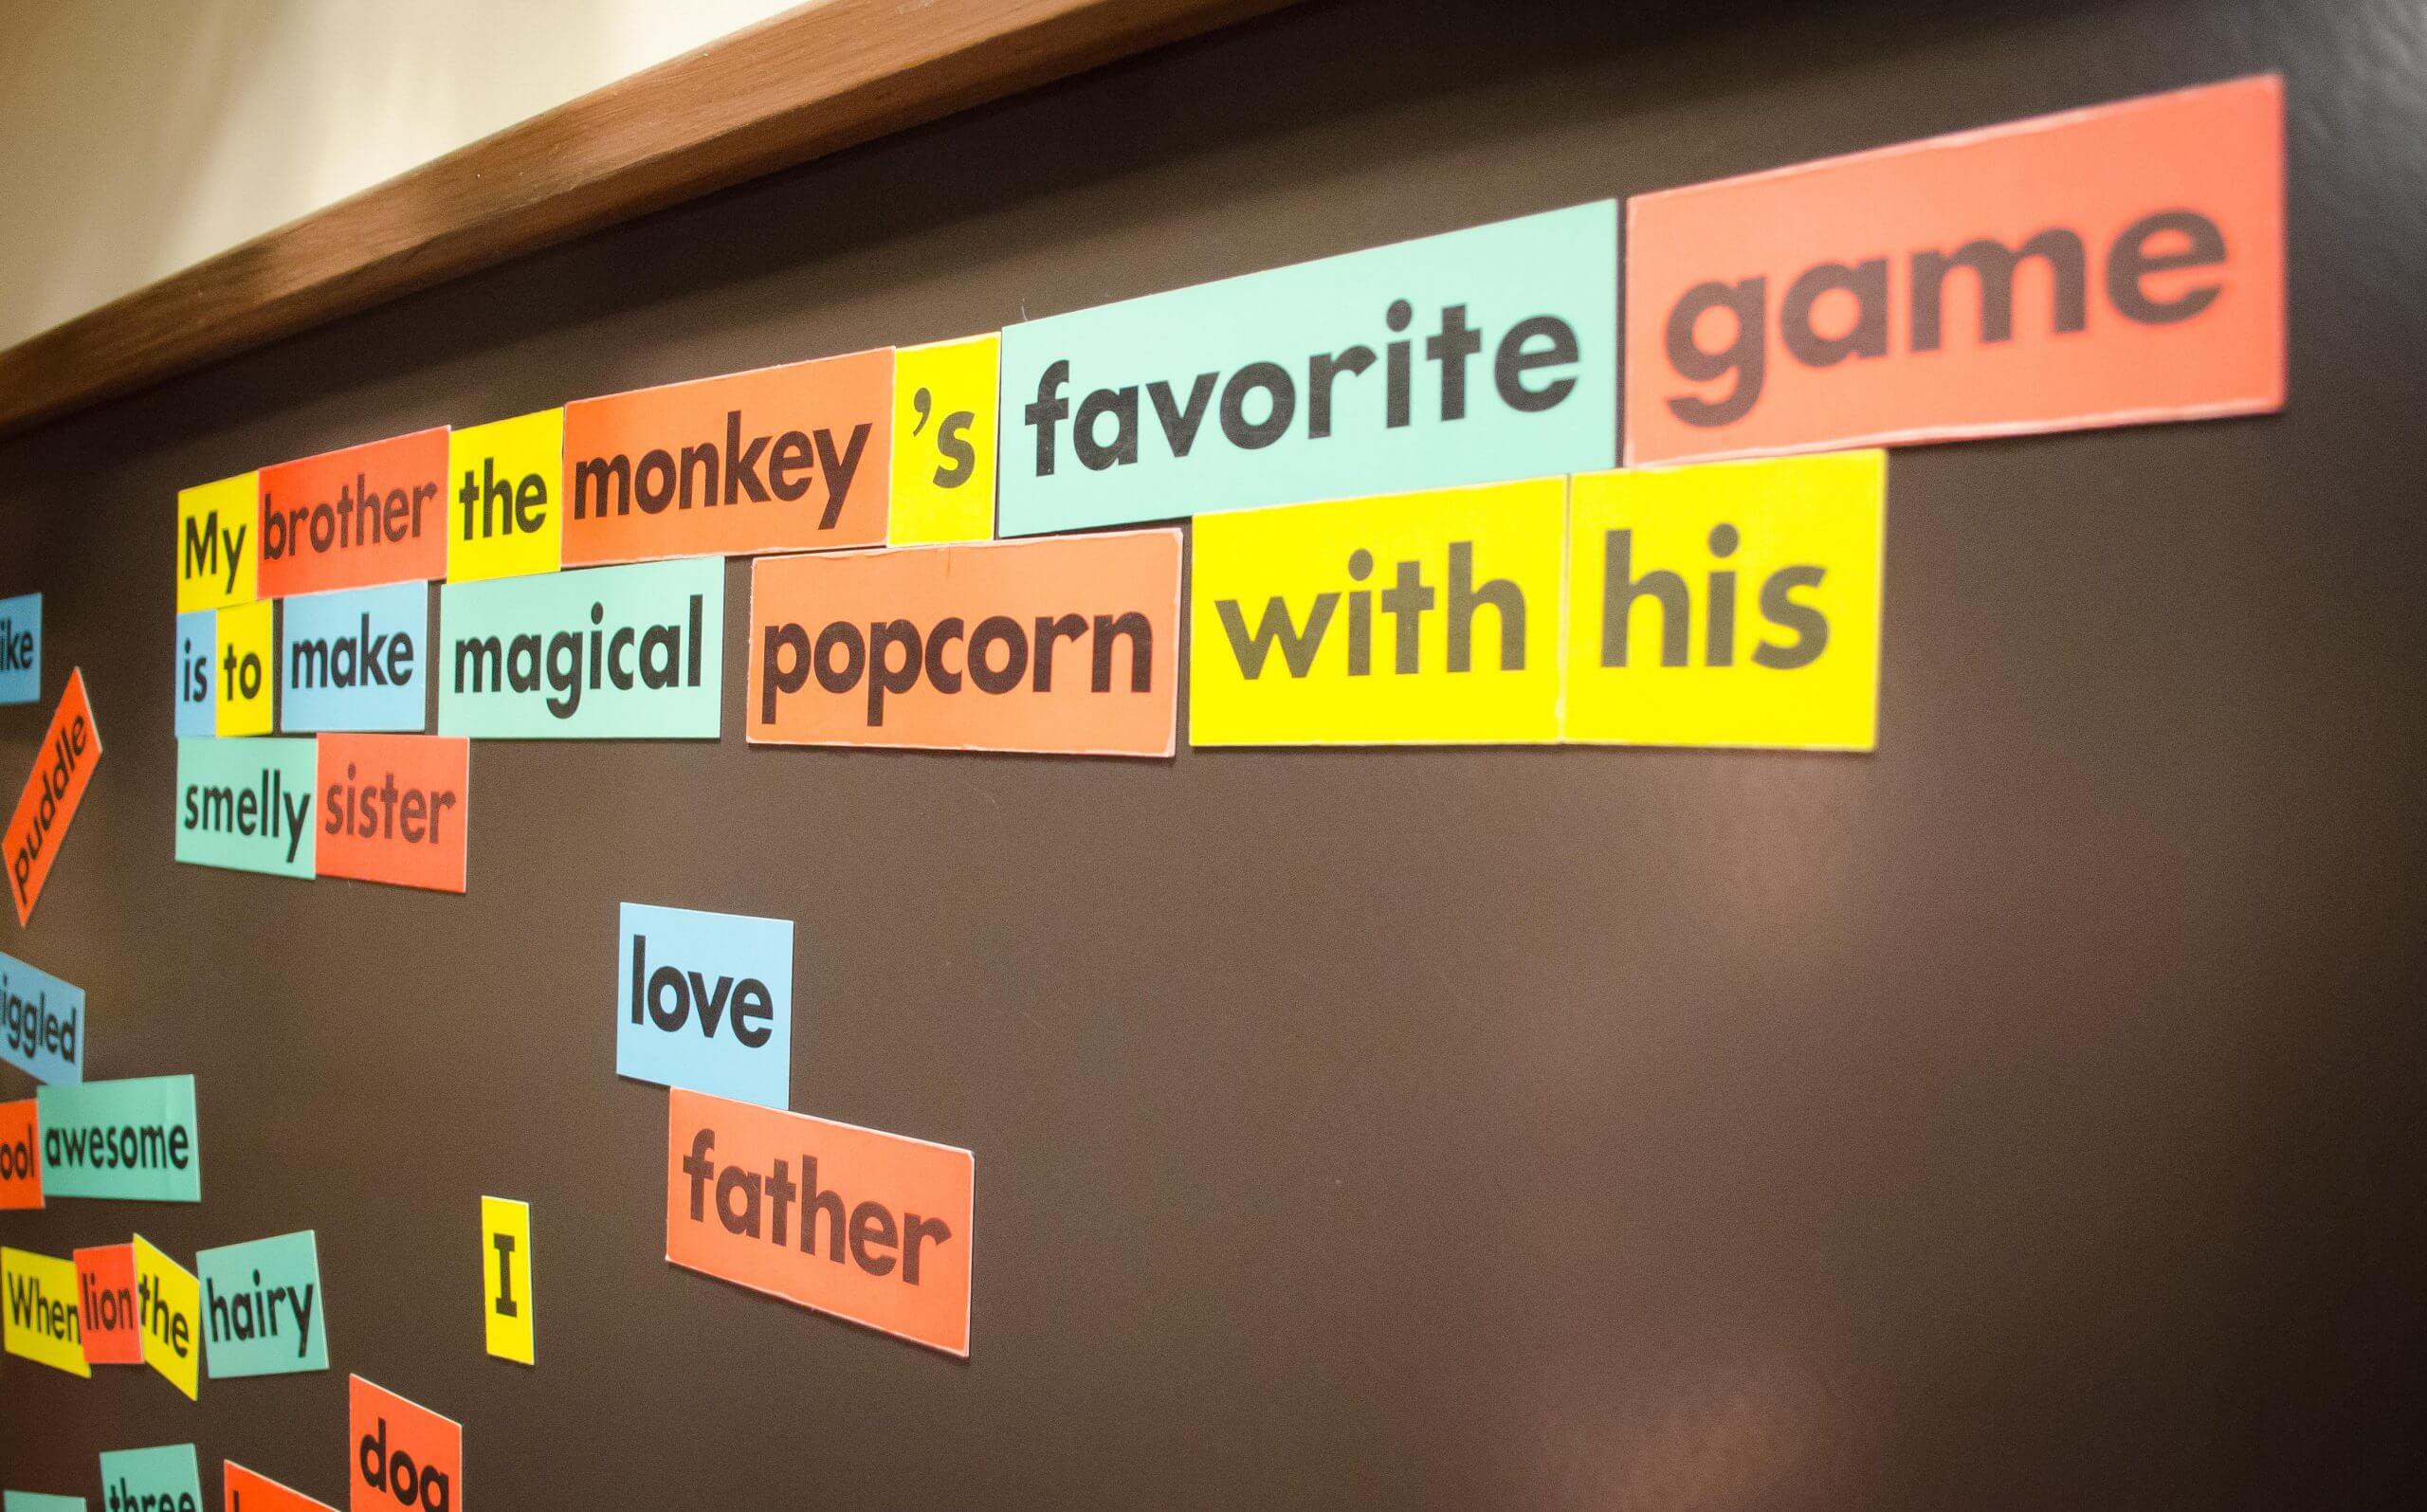 Magnetic words are placed on a board. The words read 